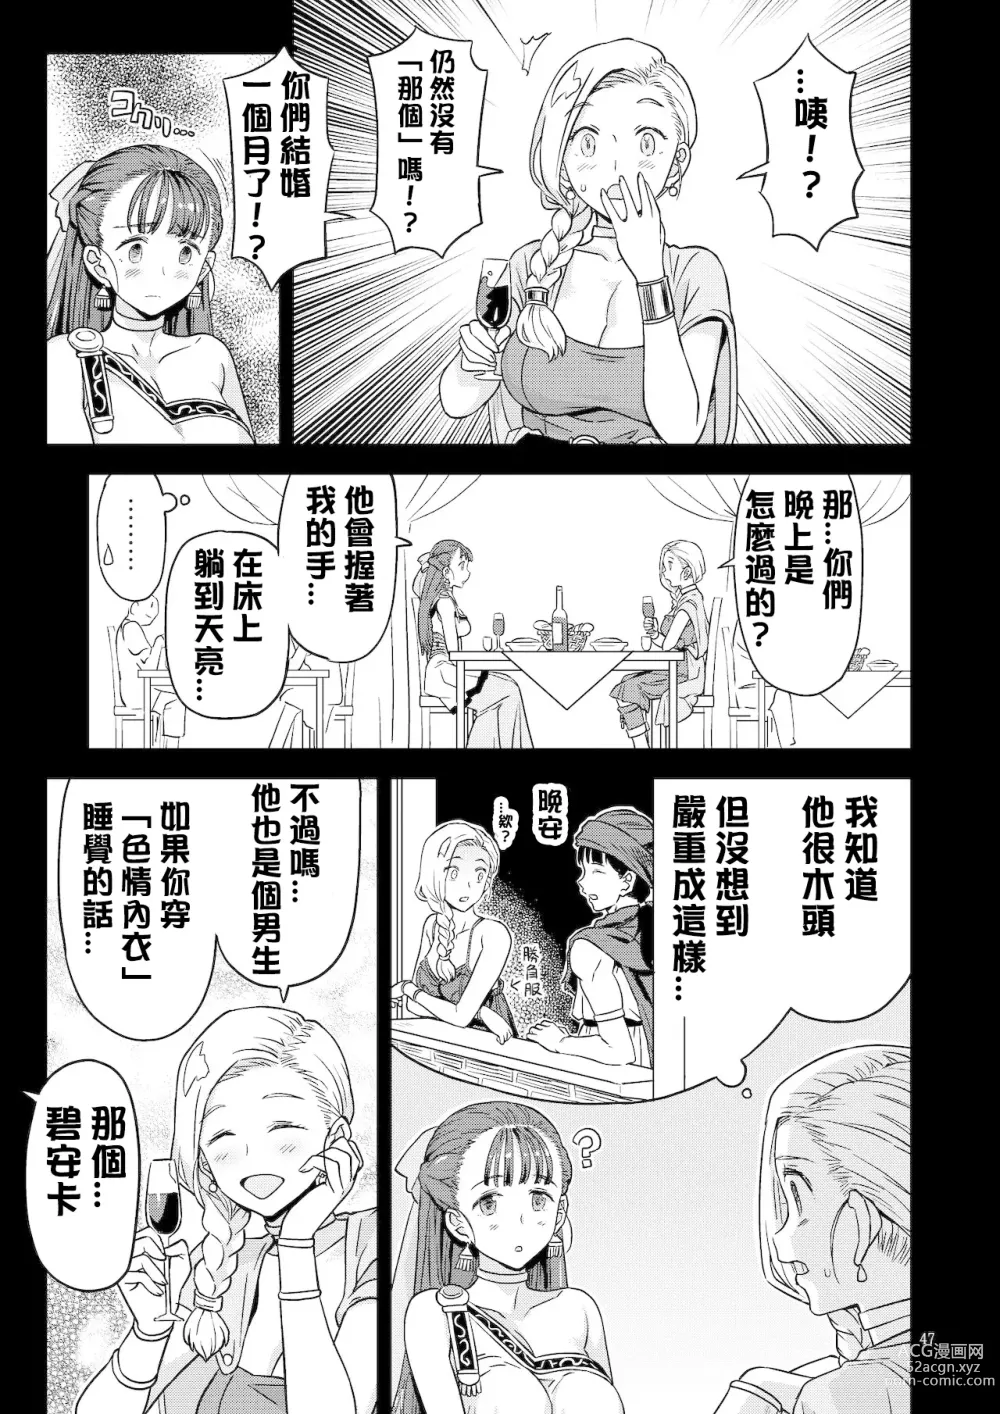 Page 4 of doujinshi Dragon Quest One Thousand and One Nights (Dragon Quest) [Digital]  【Chinese】【QTE中文翻譯】